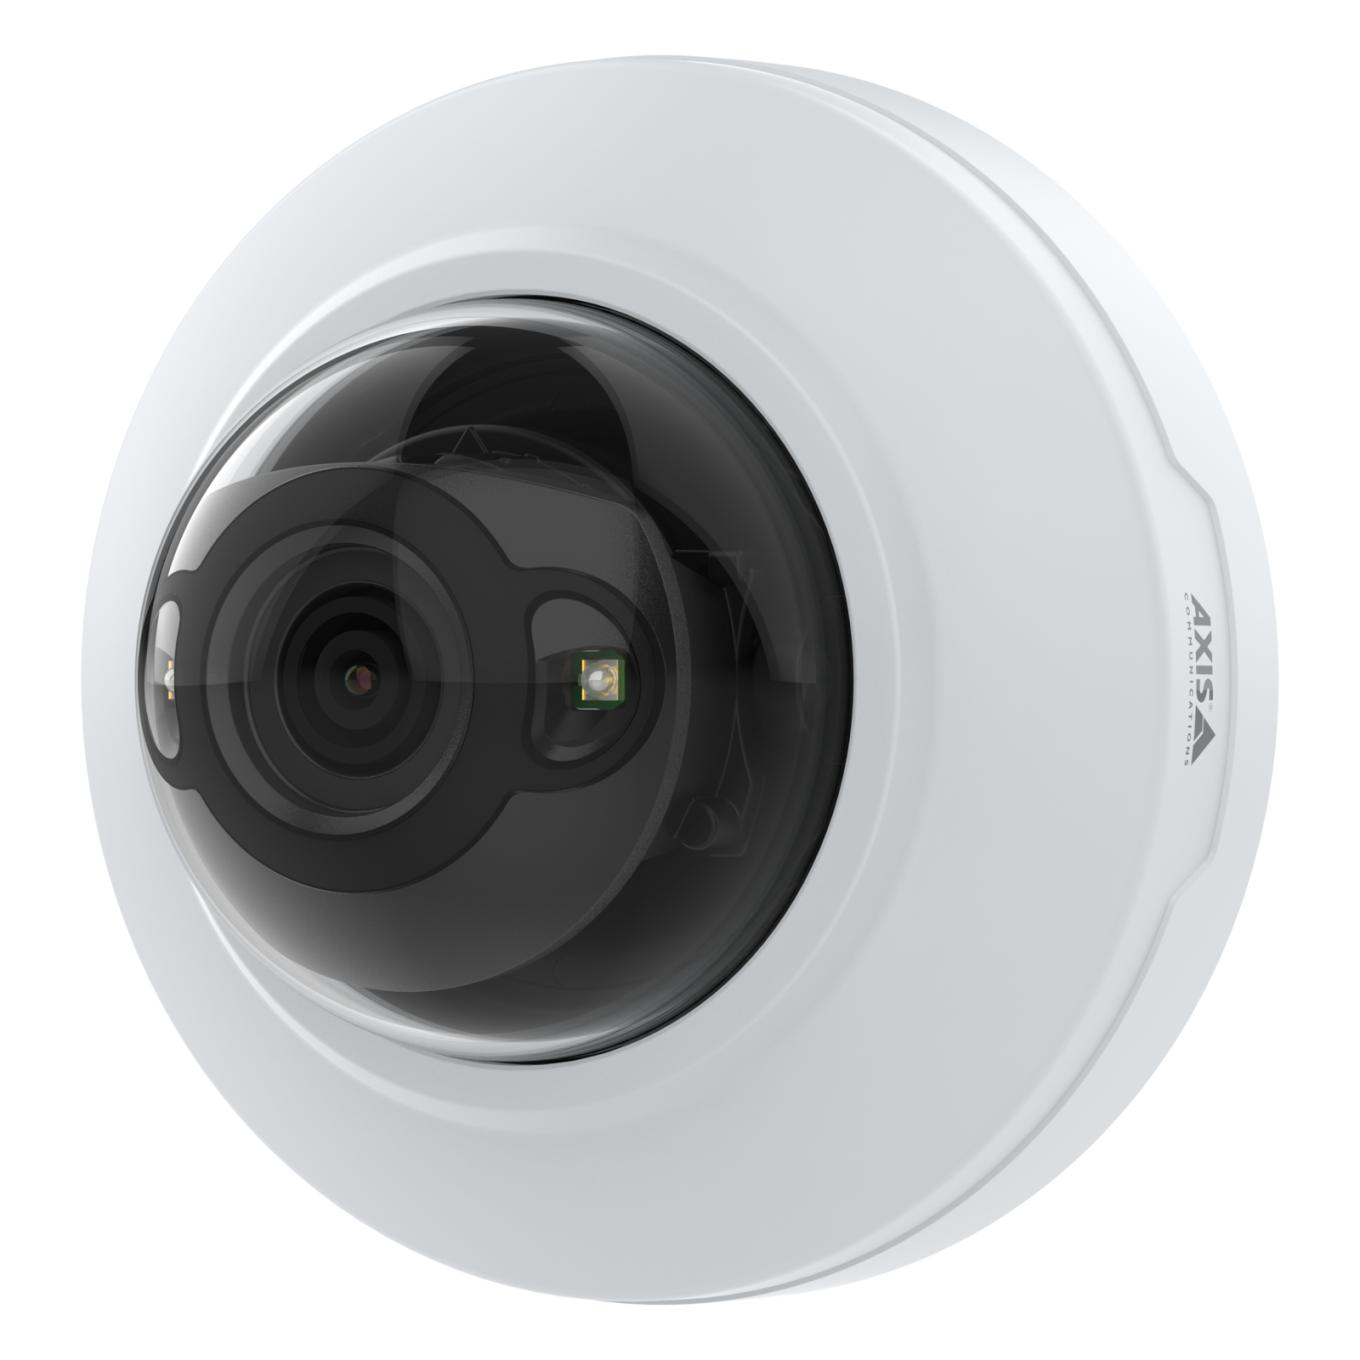 AXIS M4215-LV Dome Camera | Axis Communications